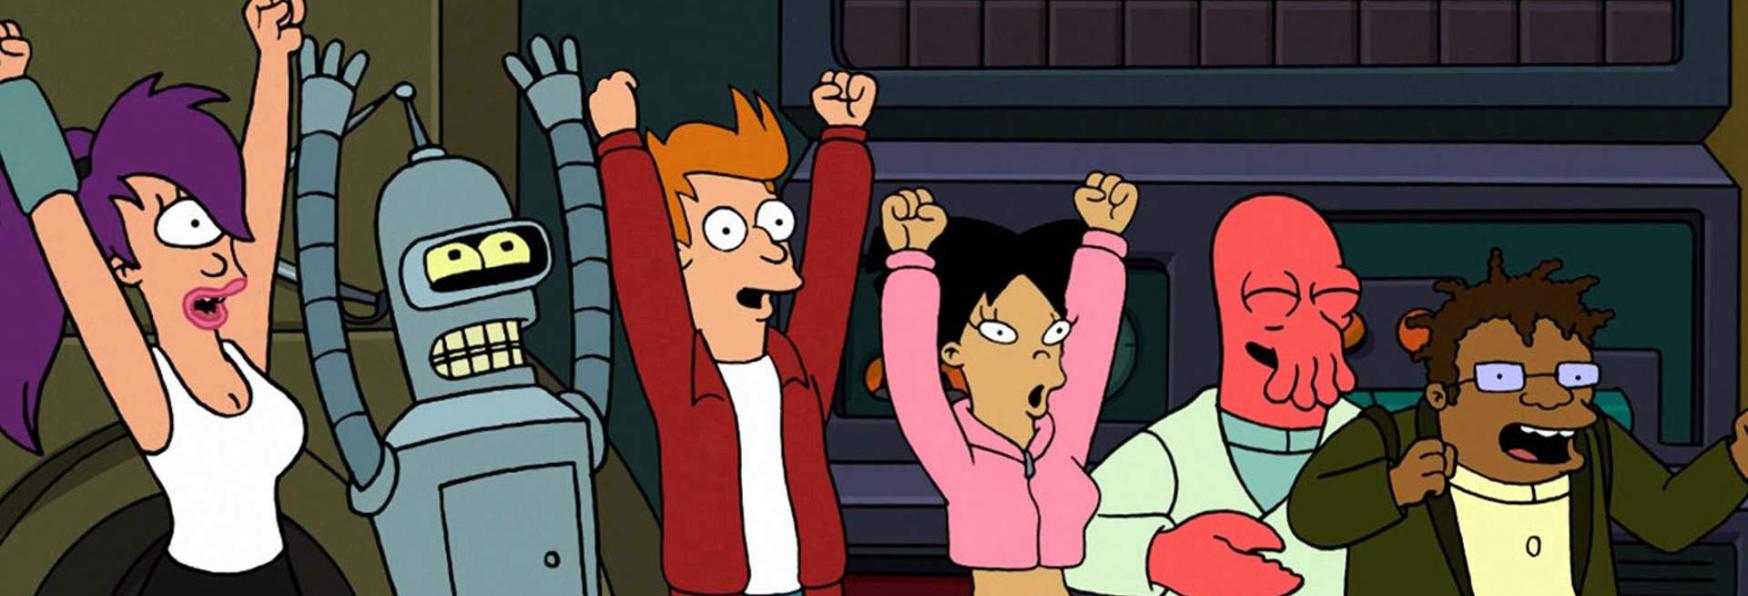 Futurama: Revealed the Release Window of the long-awaited Revival coming to Hulu